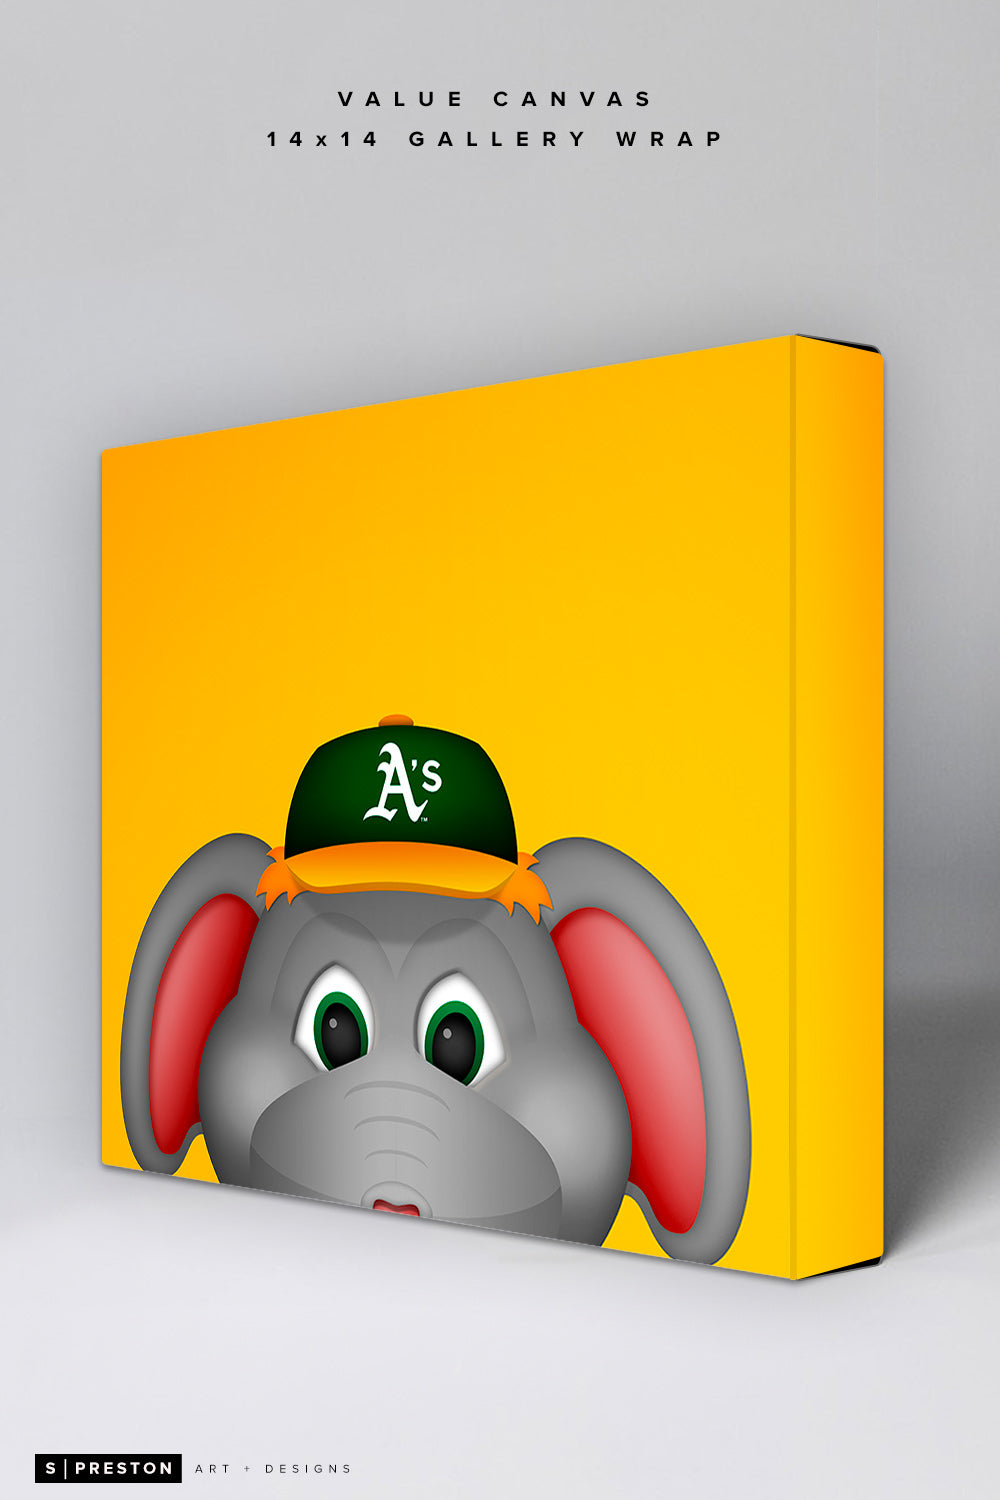 oakland a's clearance